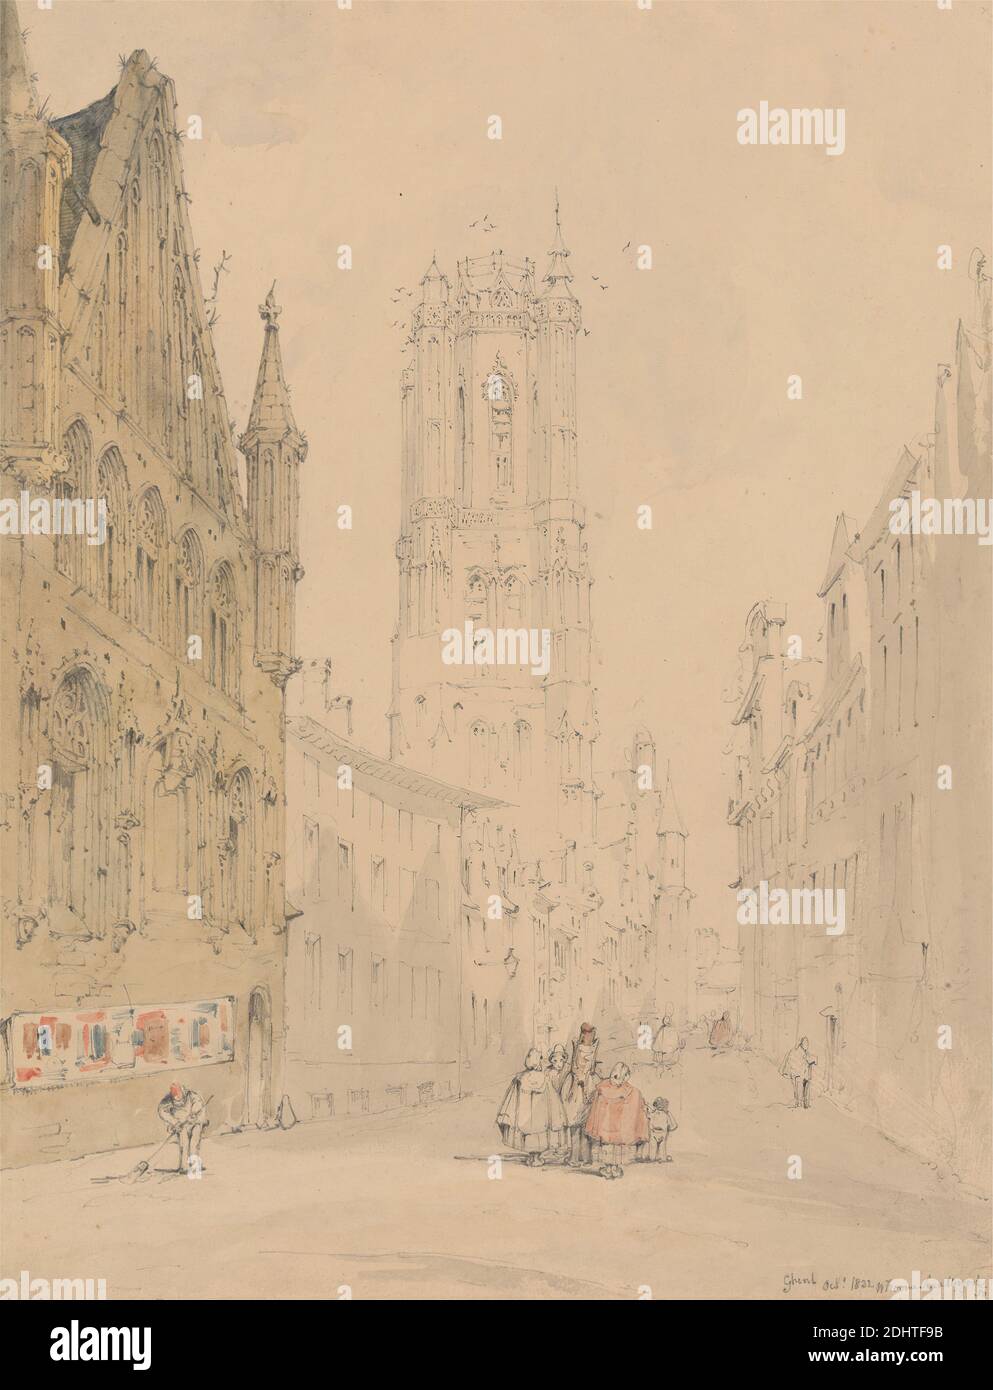 Ghent: Street with Figures, Leading Up to the Cathedral, William Frome Smallwood, 1806–1834, British, 1832, Graphite and watercolor on moderately thick, slightly textured, beige wove paper, Sheet: 12 5/8 × 9 5/8 inches (32.1 × 24.4 cm), architectural subject, broom, buildings, capes, cathedral, cityscape, genre subject, labor, men, street, walking, women, working, Belgium, Ghent, Oost-Vlaanderen, Saint Bavo Cathedral, Vlaanderen Stock Photo